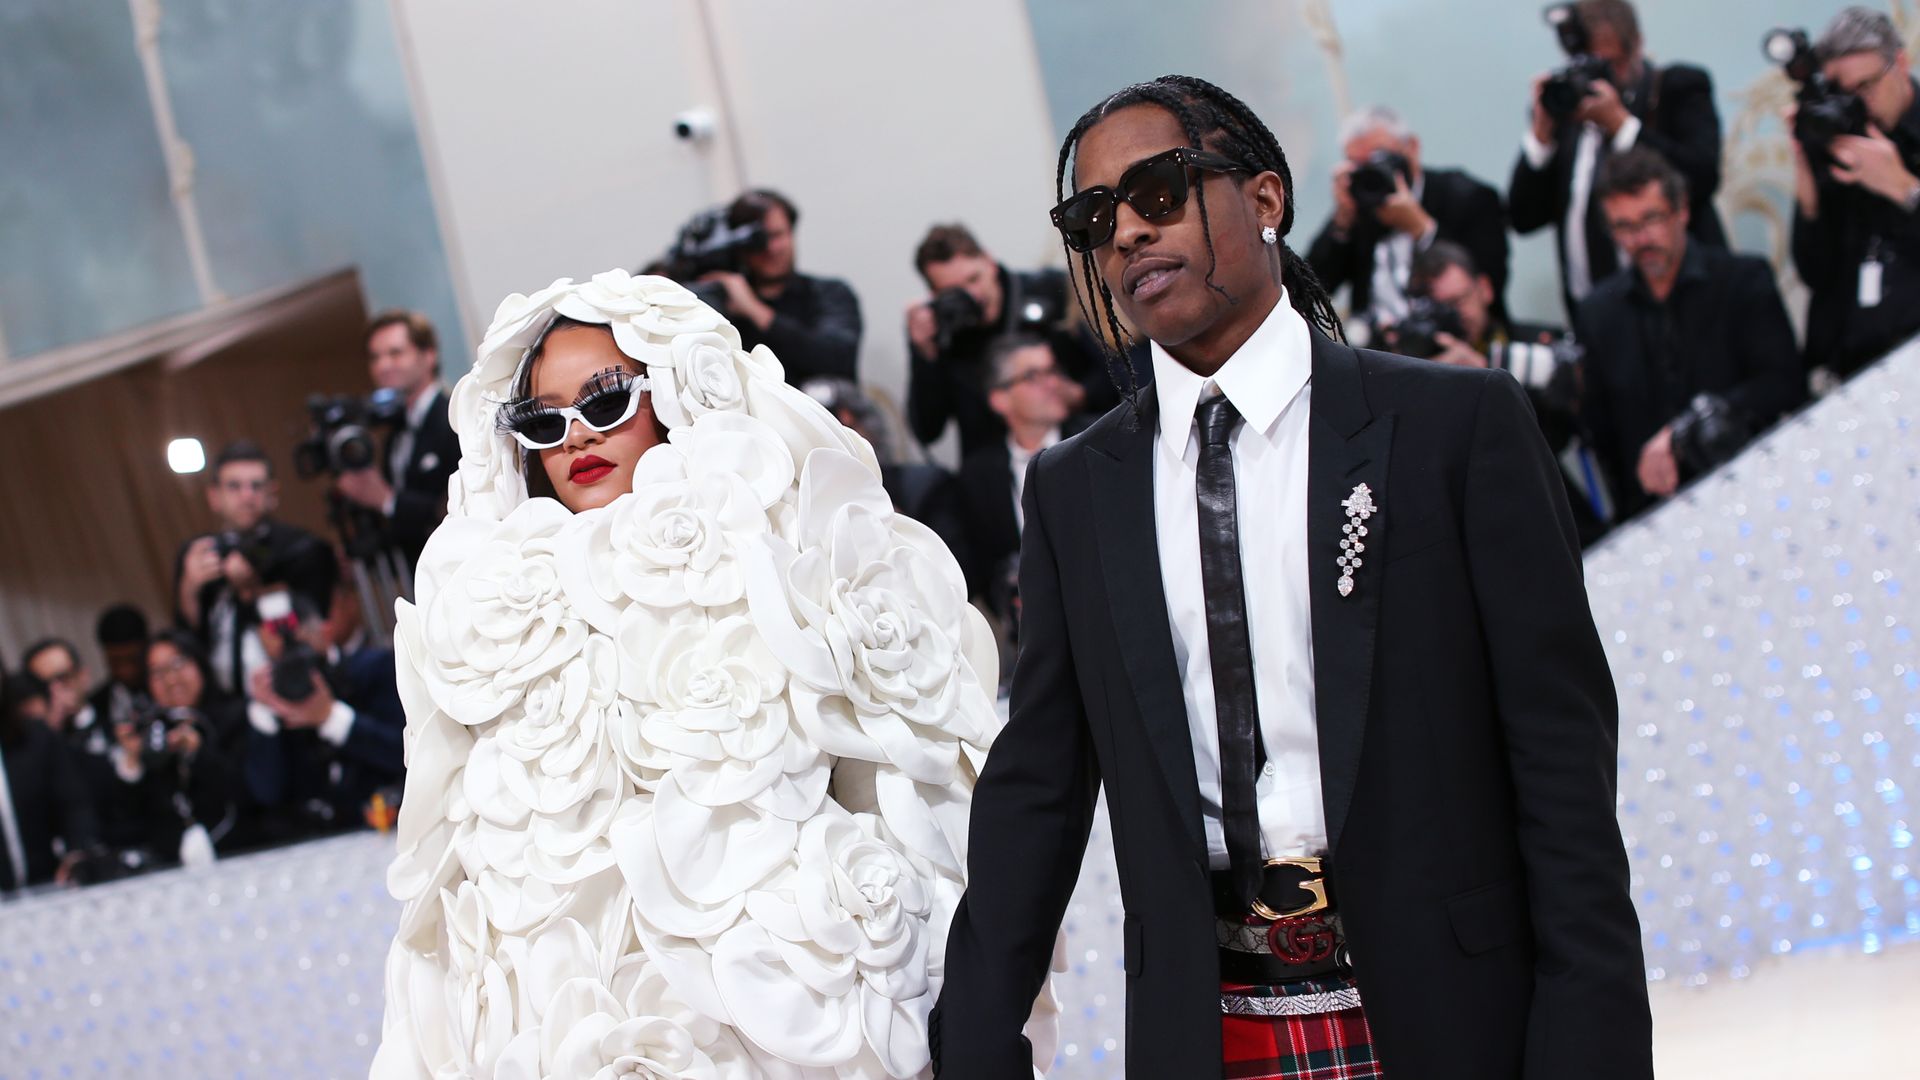 Rihanna and A$AP Rocky won best dressed couple at the Golden Globes